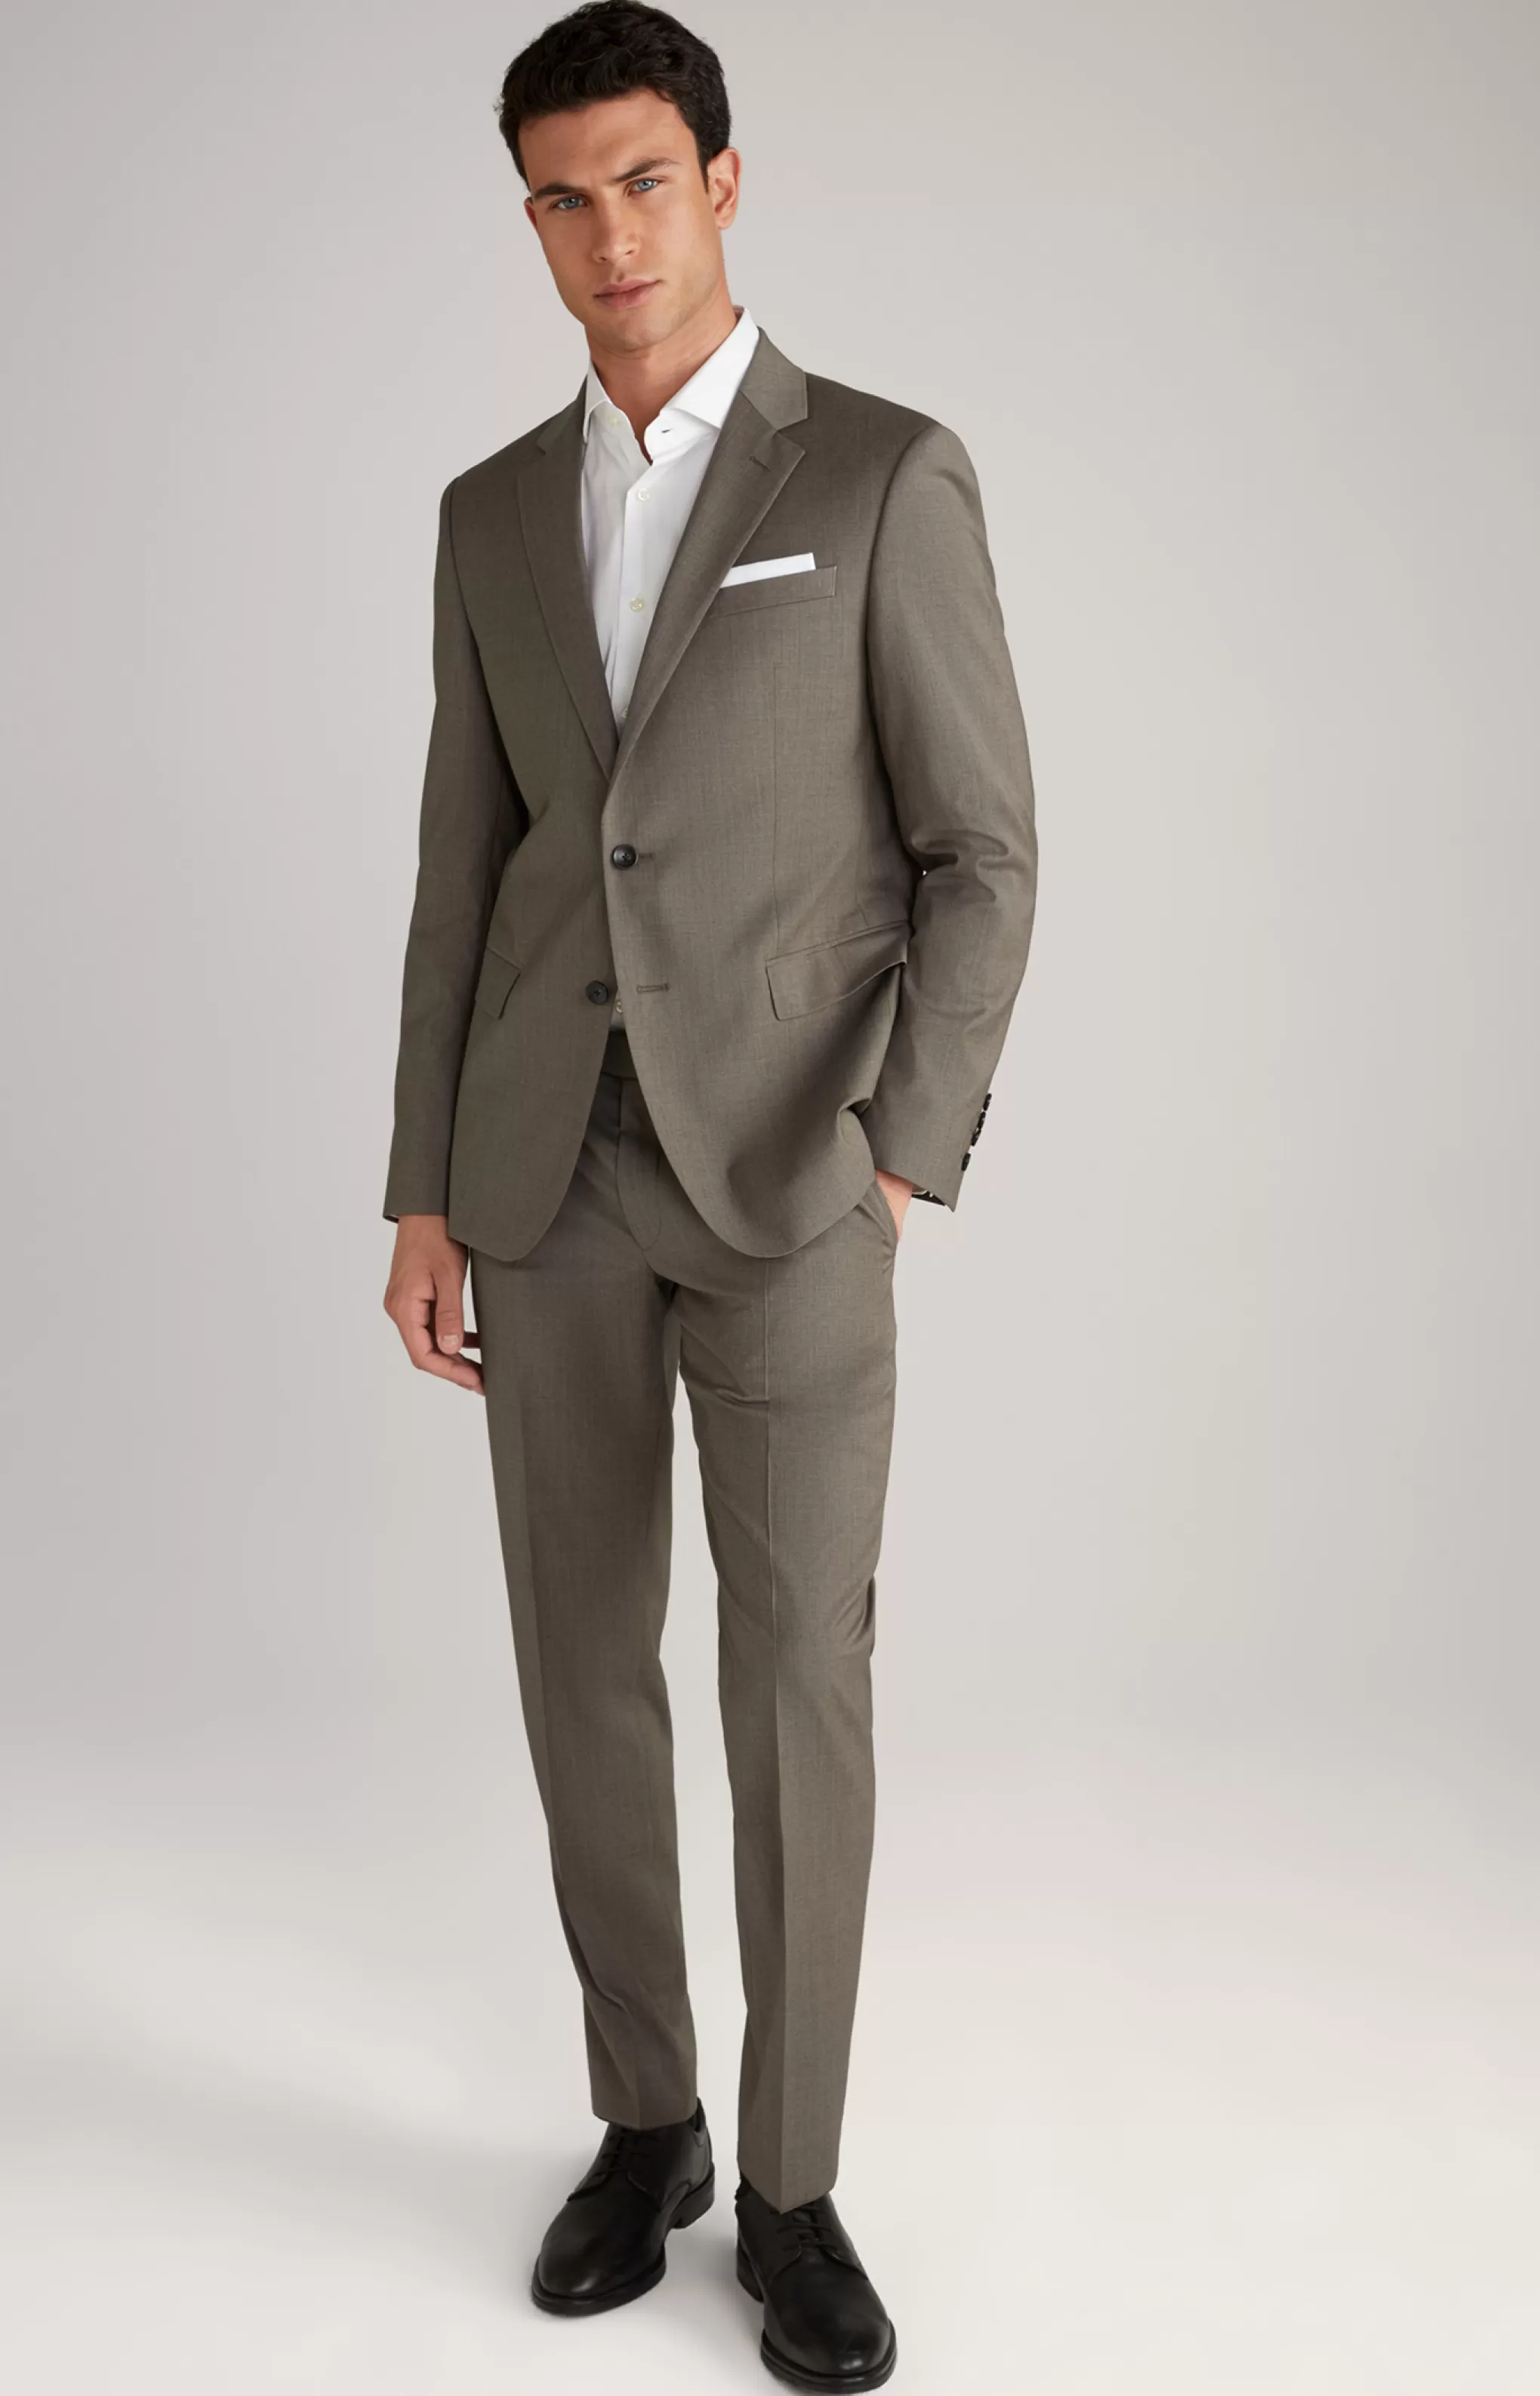 Suits | Clothing*JOOP Suits | Clothing Herby-Blayr Suit in Beige/Grey